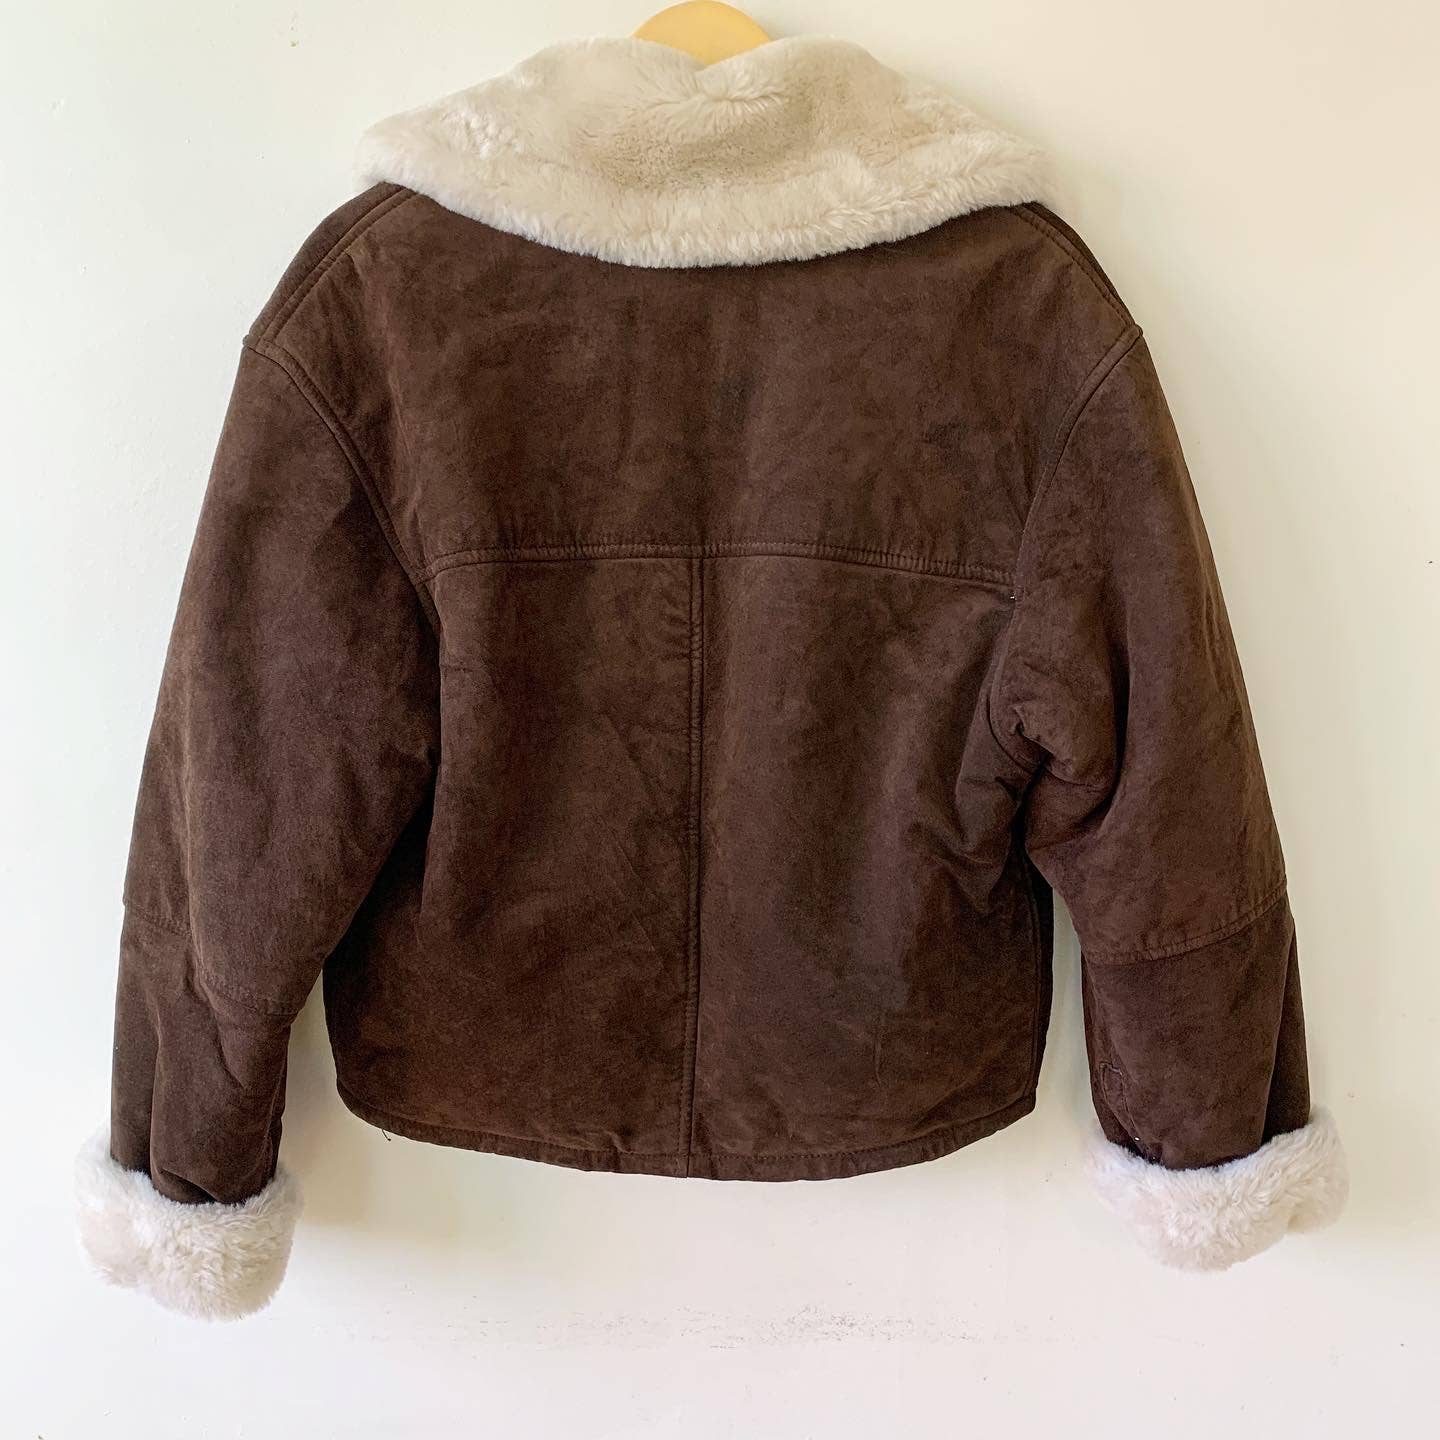 Women's Vintage Express Suede Brown Bomber Jacket with Fur Lining